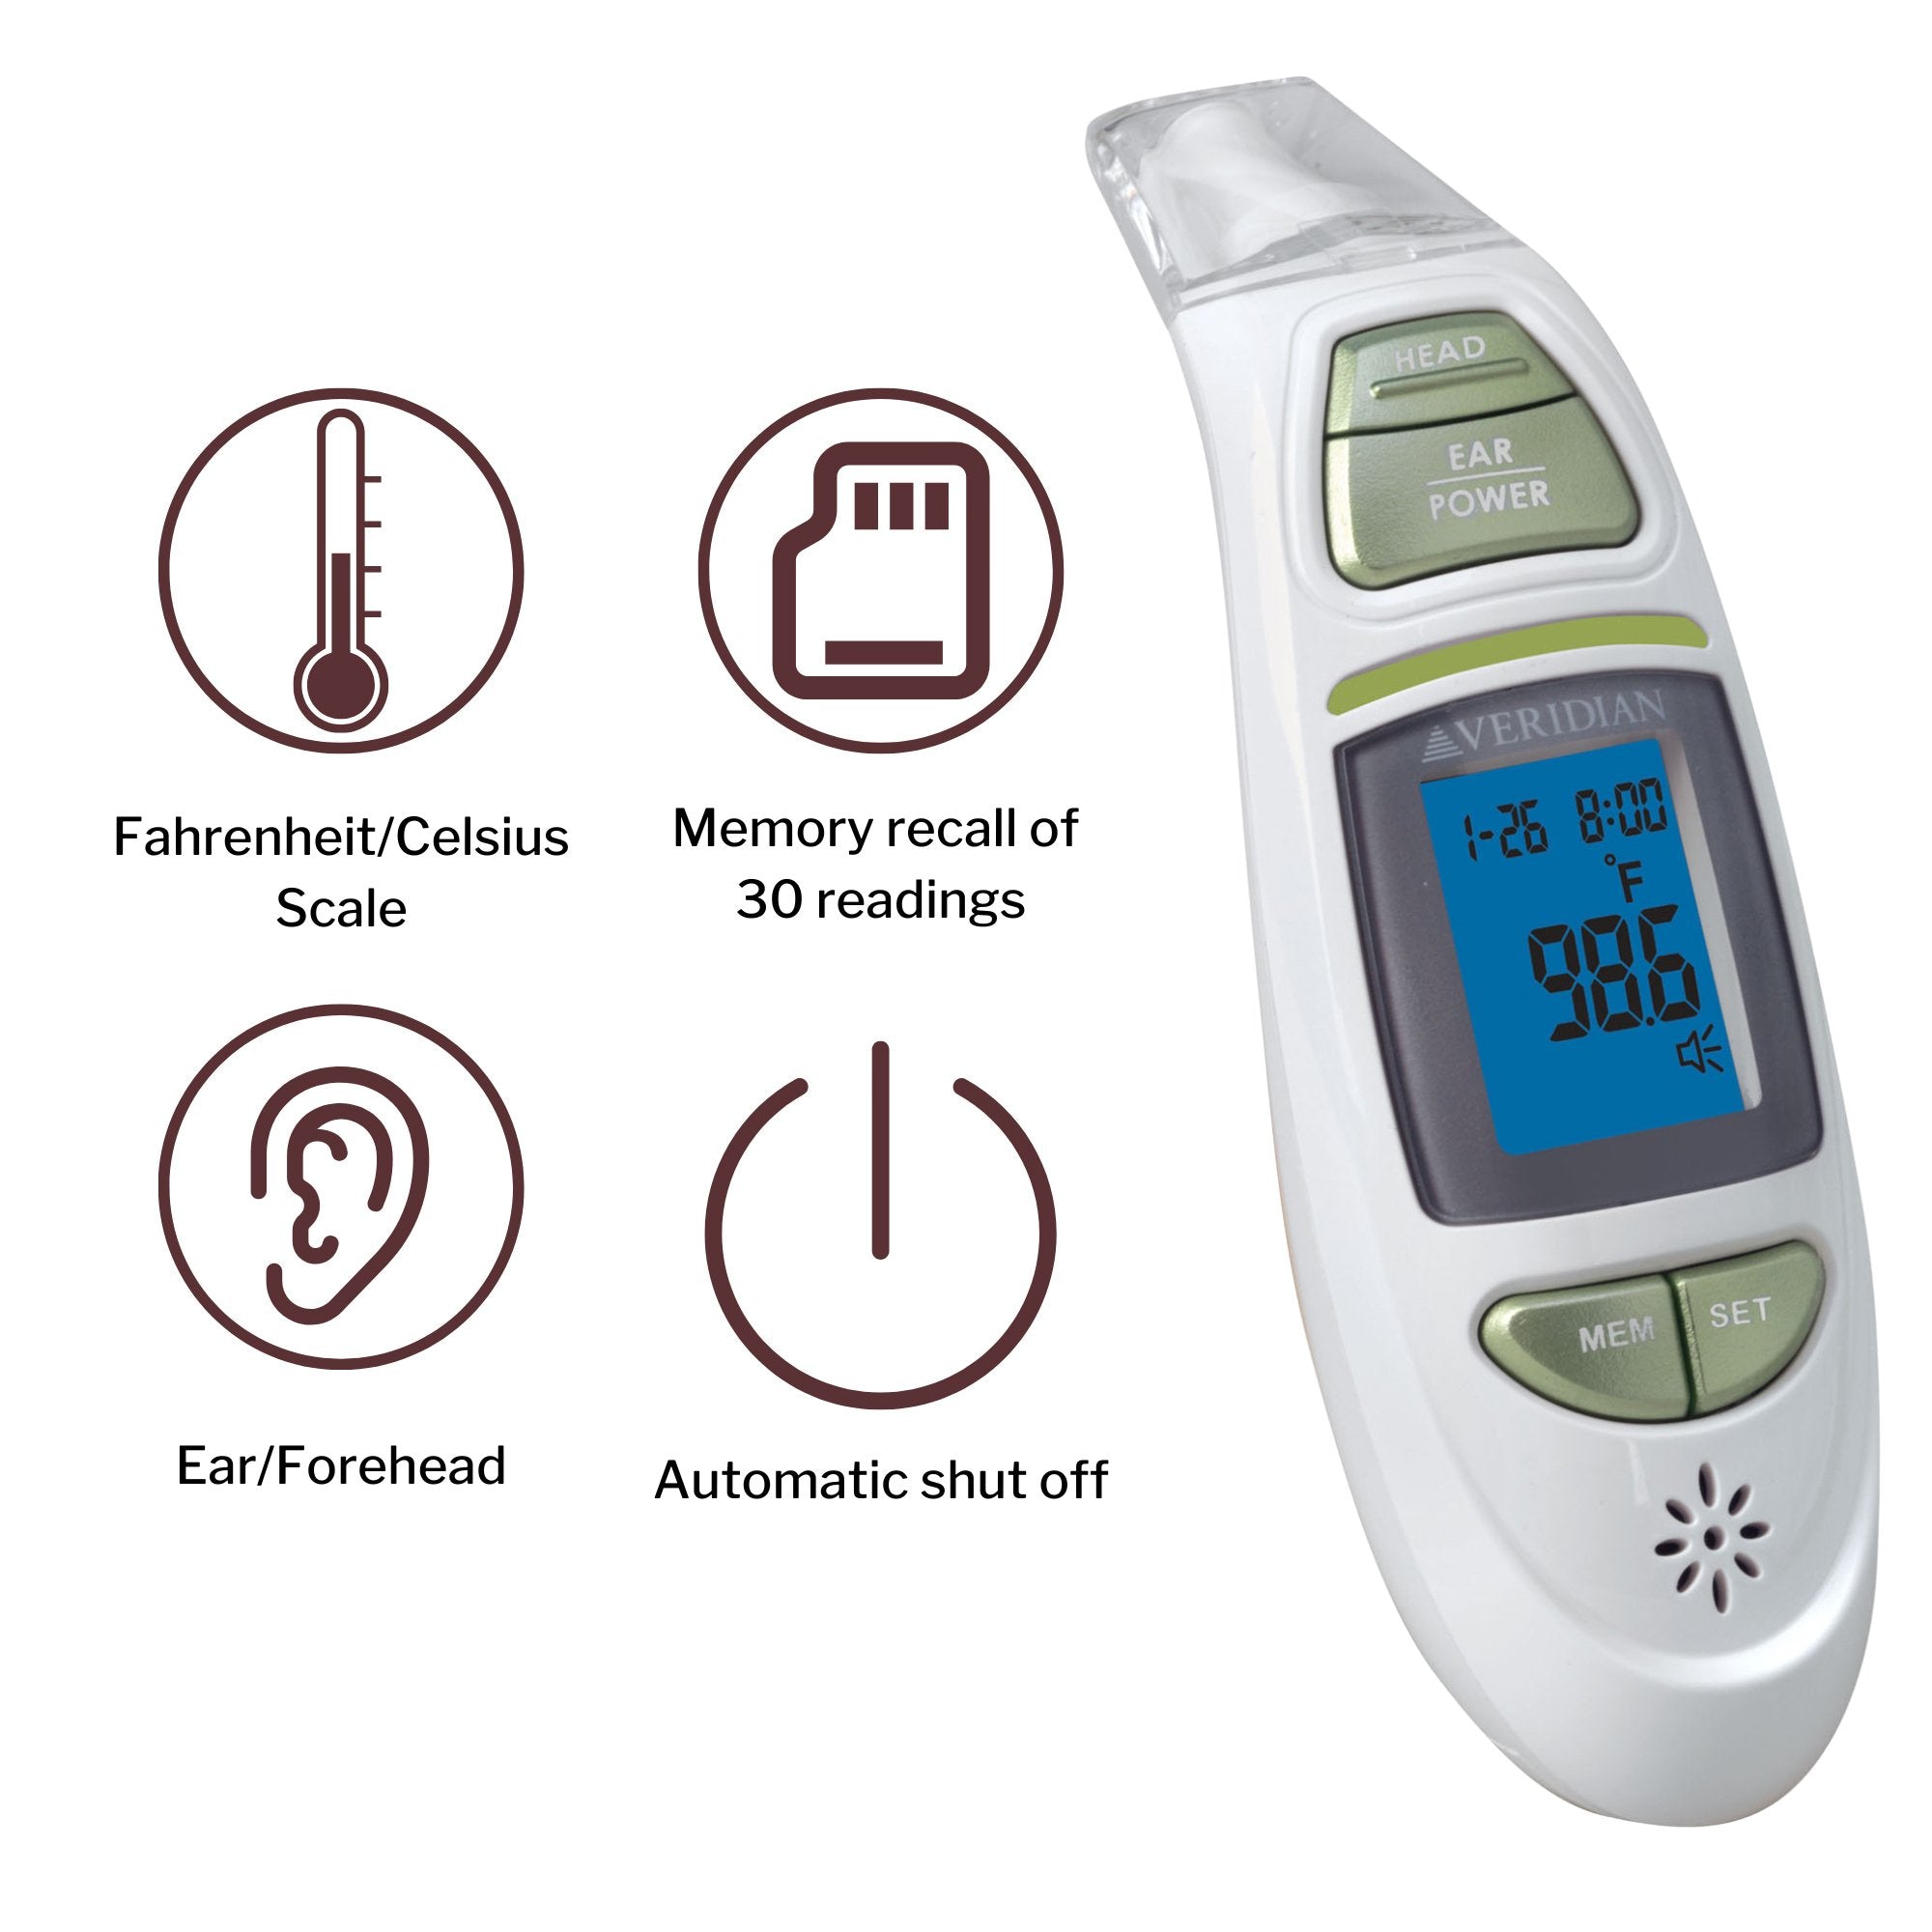 Veridian Infrared Thermometer, Tympanic Ear Digital Talking Thermometer (1 Unit)